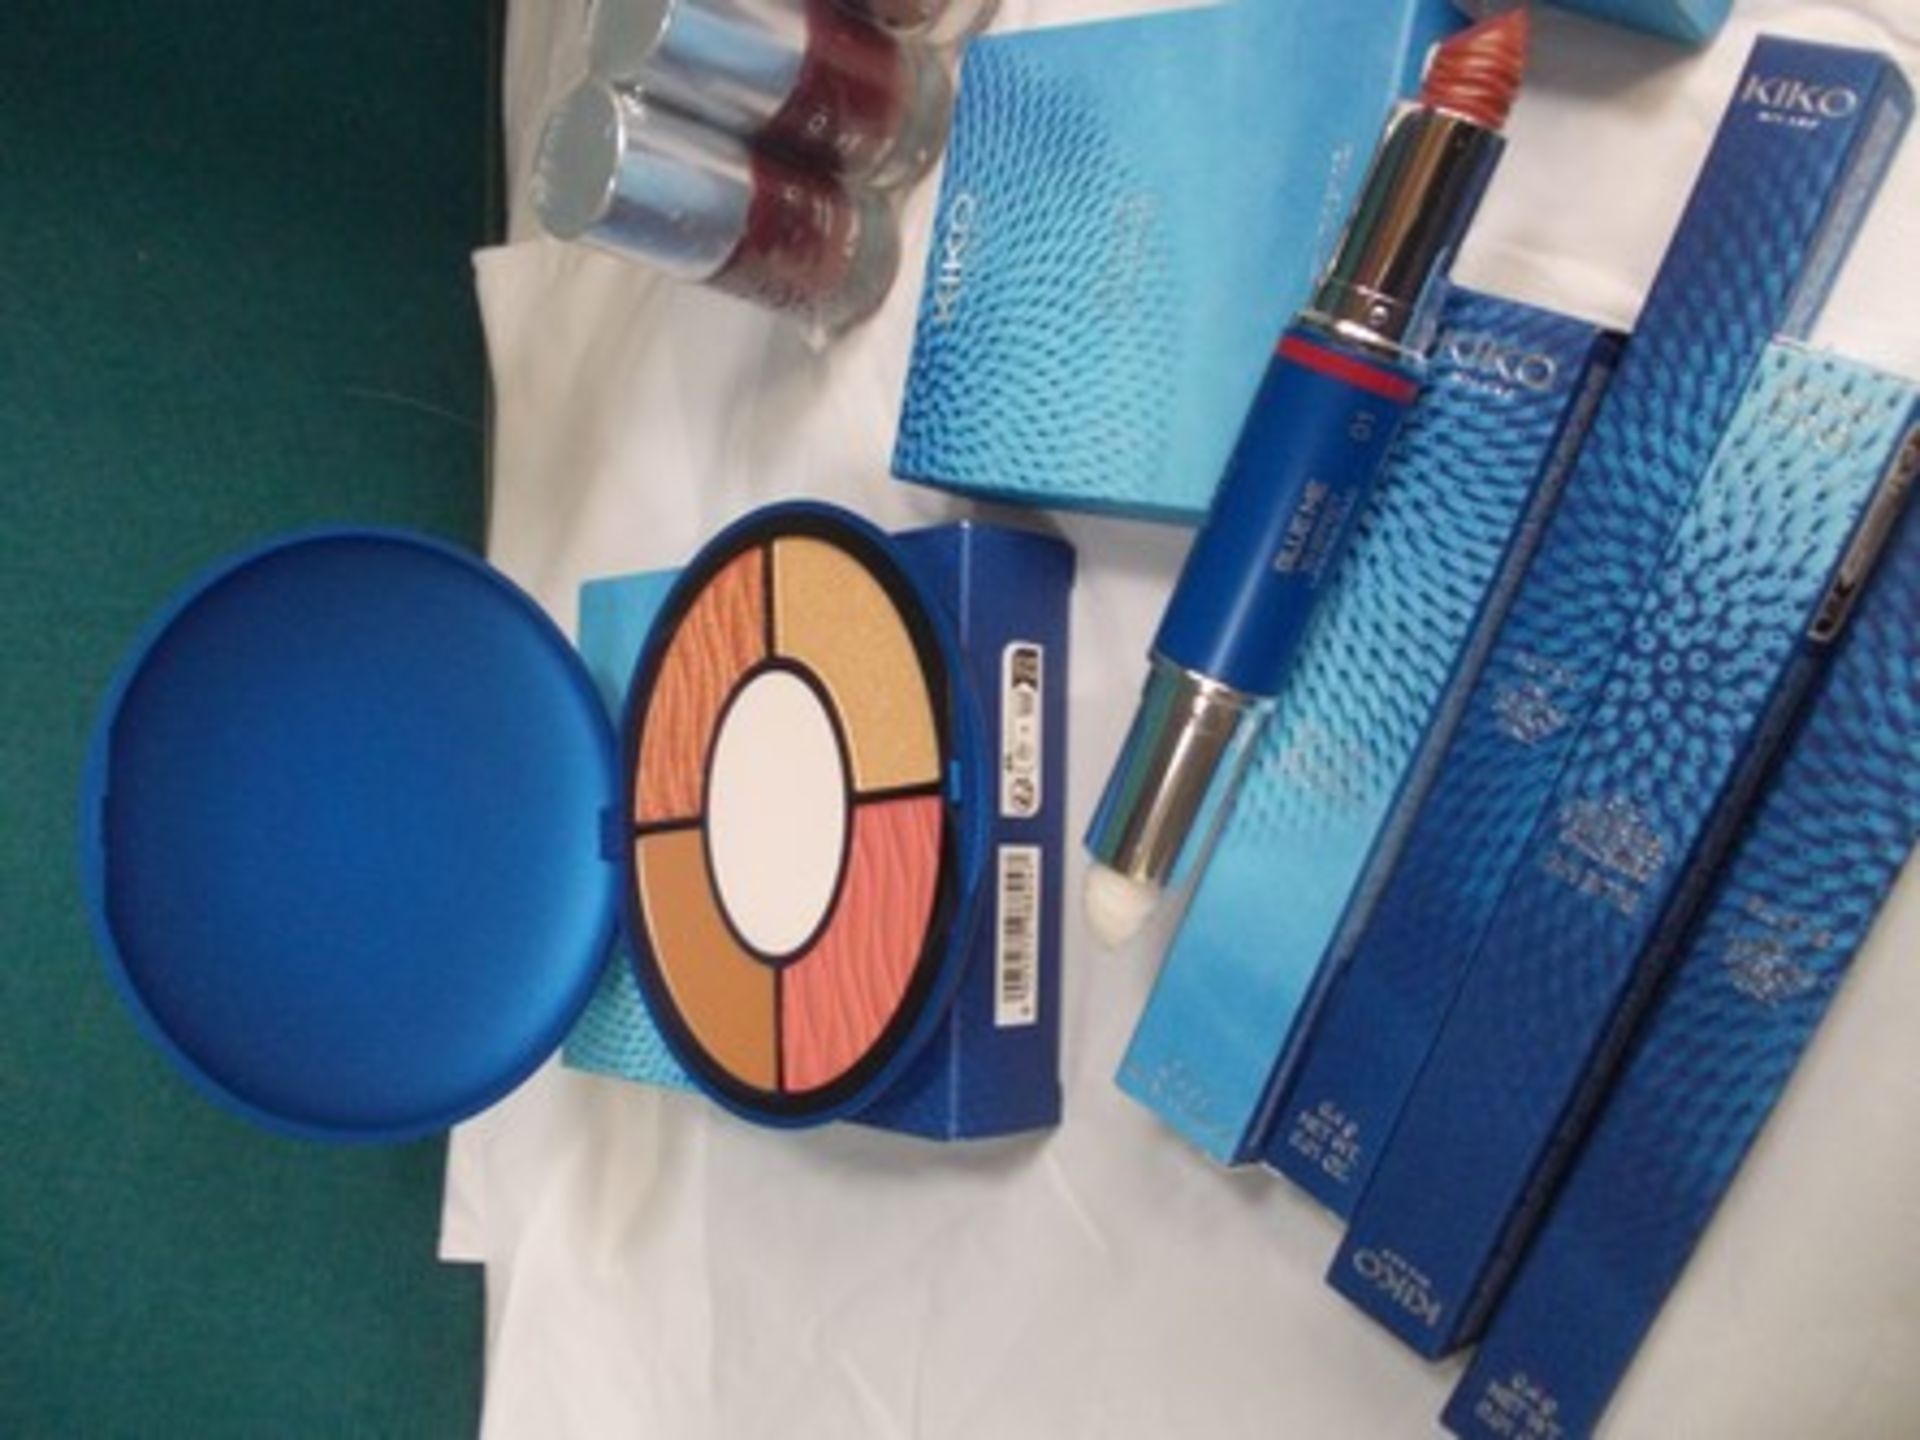 11 x Kiko Blue Me mixed cosmetics including complete face palette, jelly face serum, 3D effect - Image 2 of 3